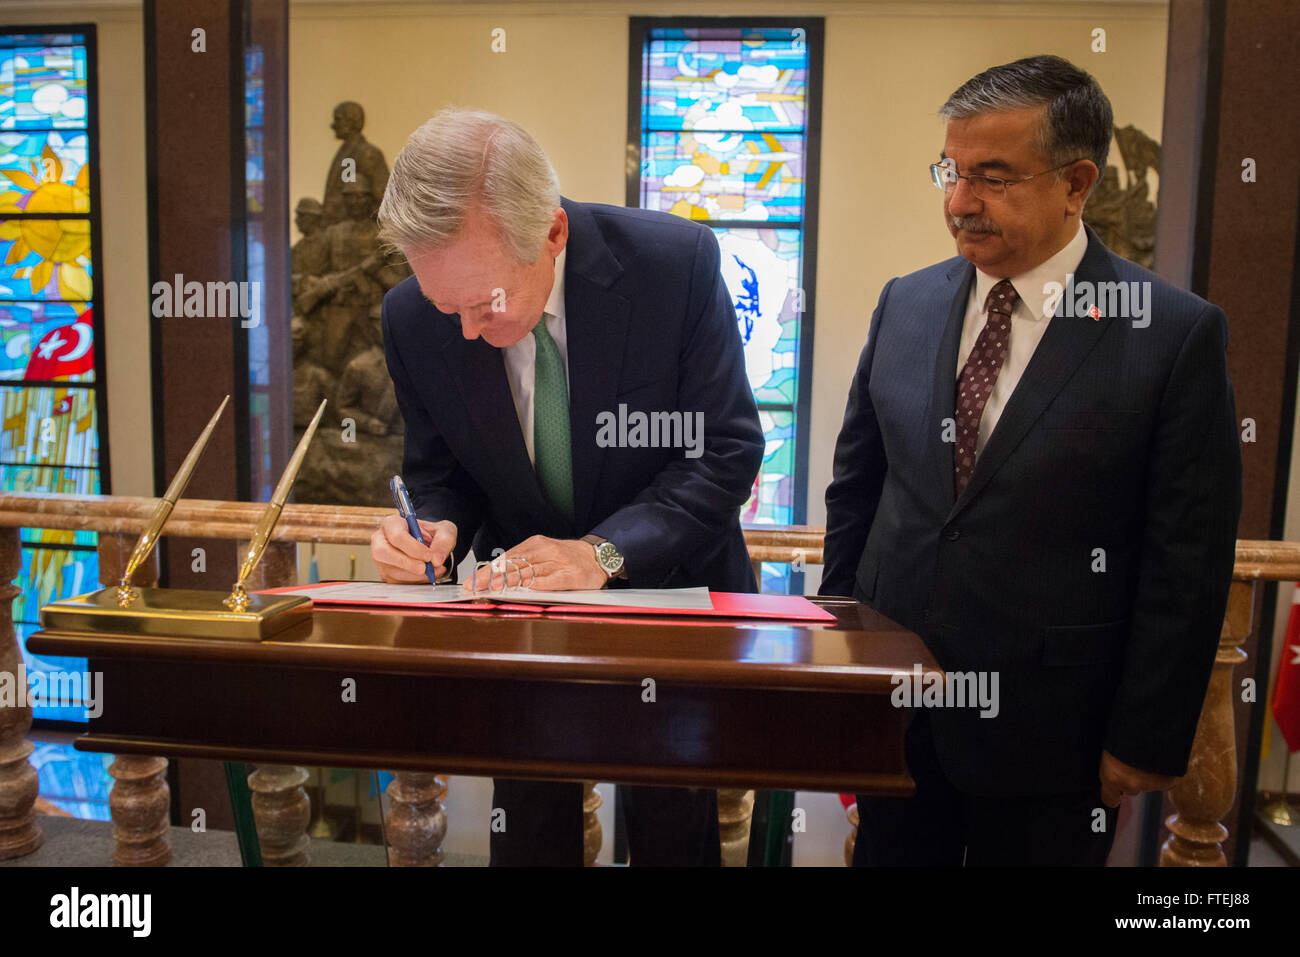 ANKARA, Turkey (Nov. 12, 2014) Secretary of the Navy (SECNAV) Ray Mabus signs the guest log at the Ministry of Defense as the Turkish Minister of Defense Ismet Yilmaz looks on. Mabus met with Yilmaz and other Turkish leaders to discuss Department of the Navy relations between the two countries. Stock Photo